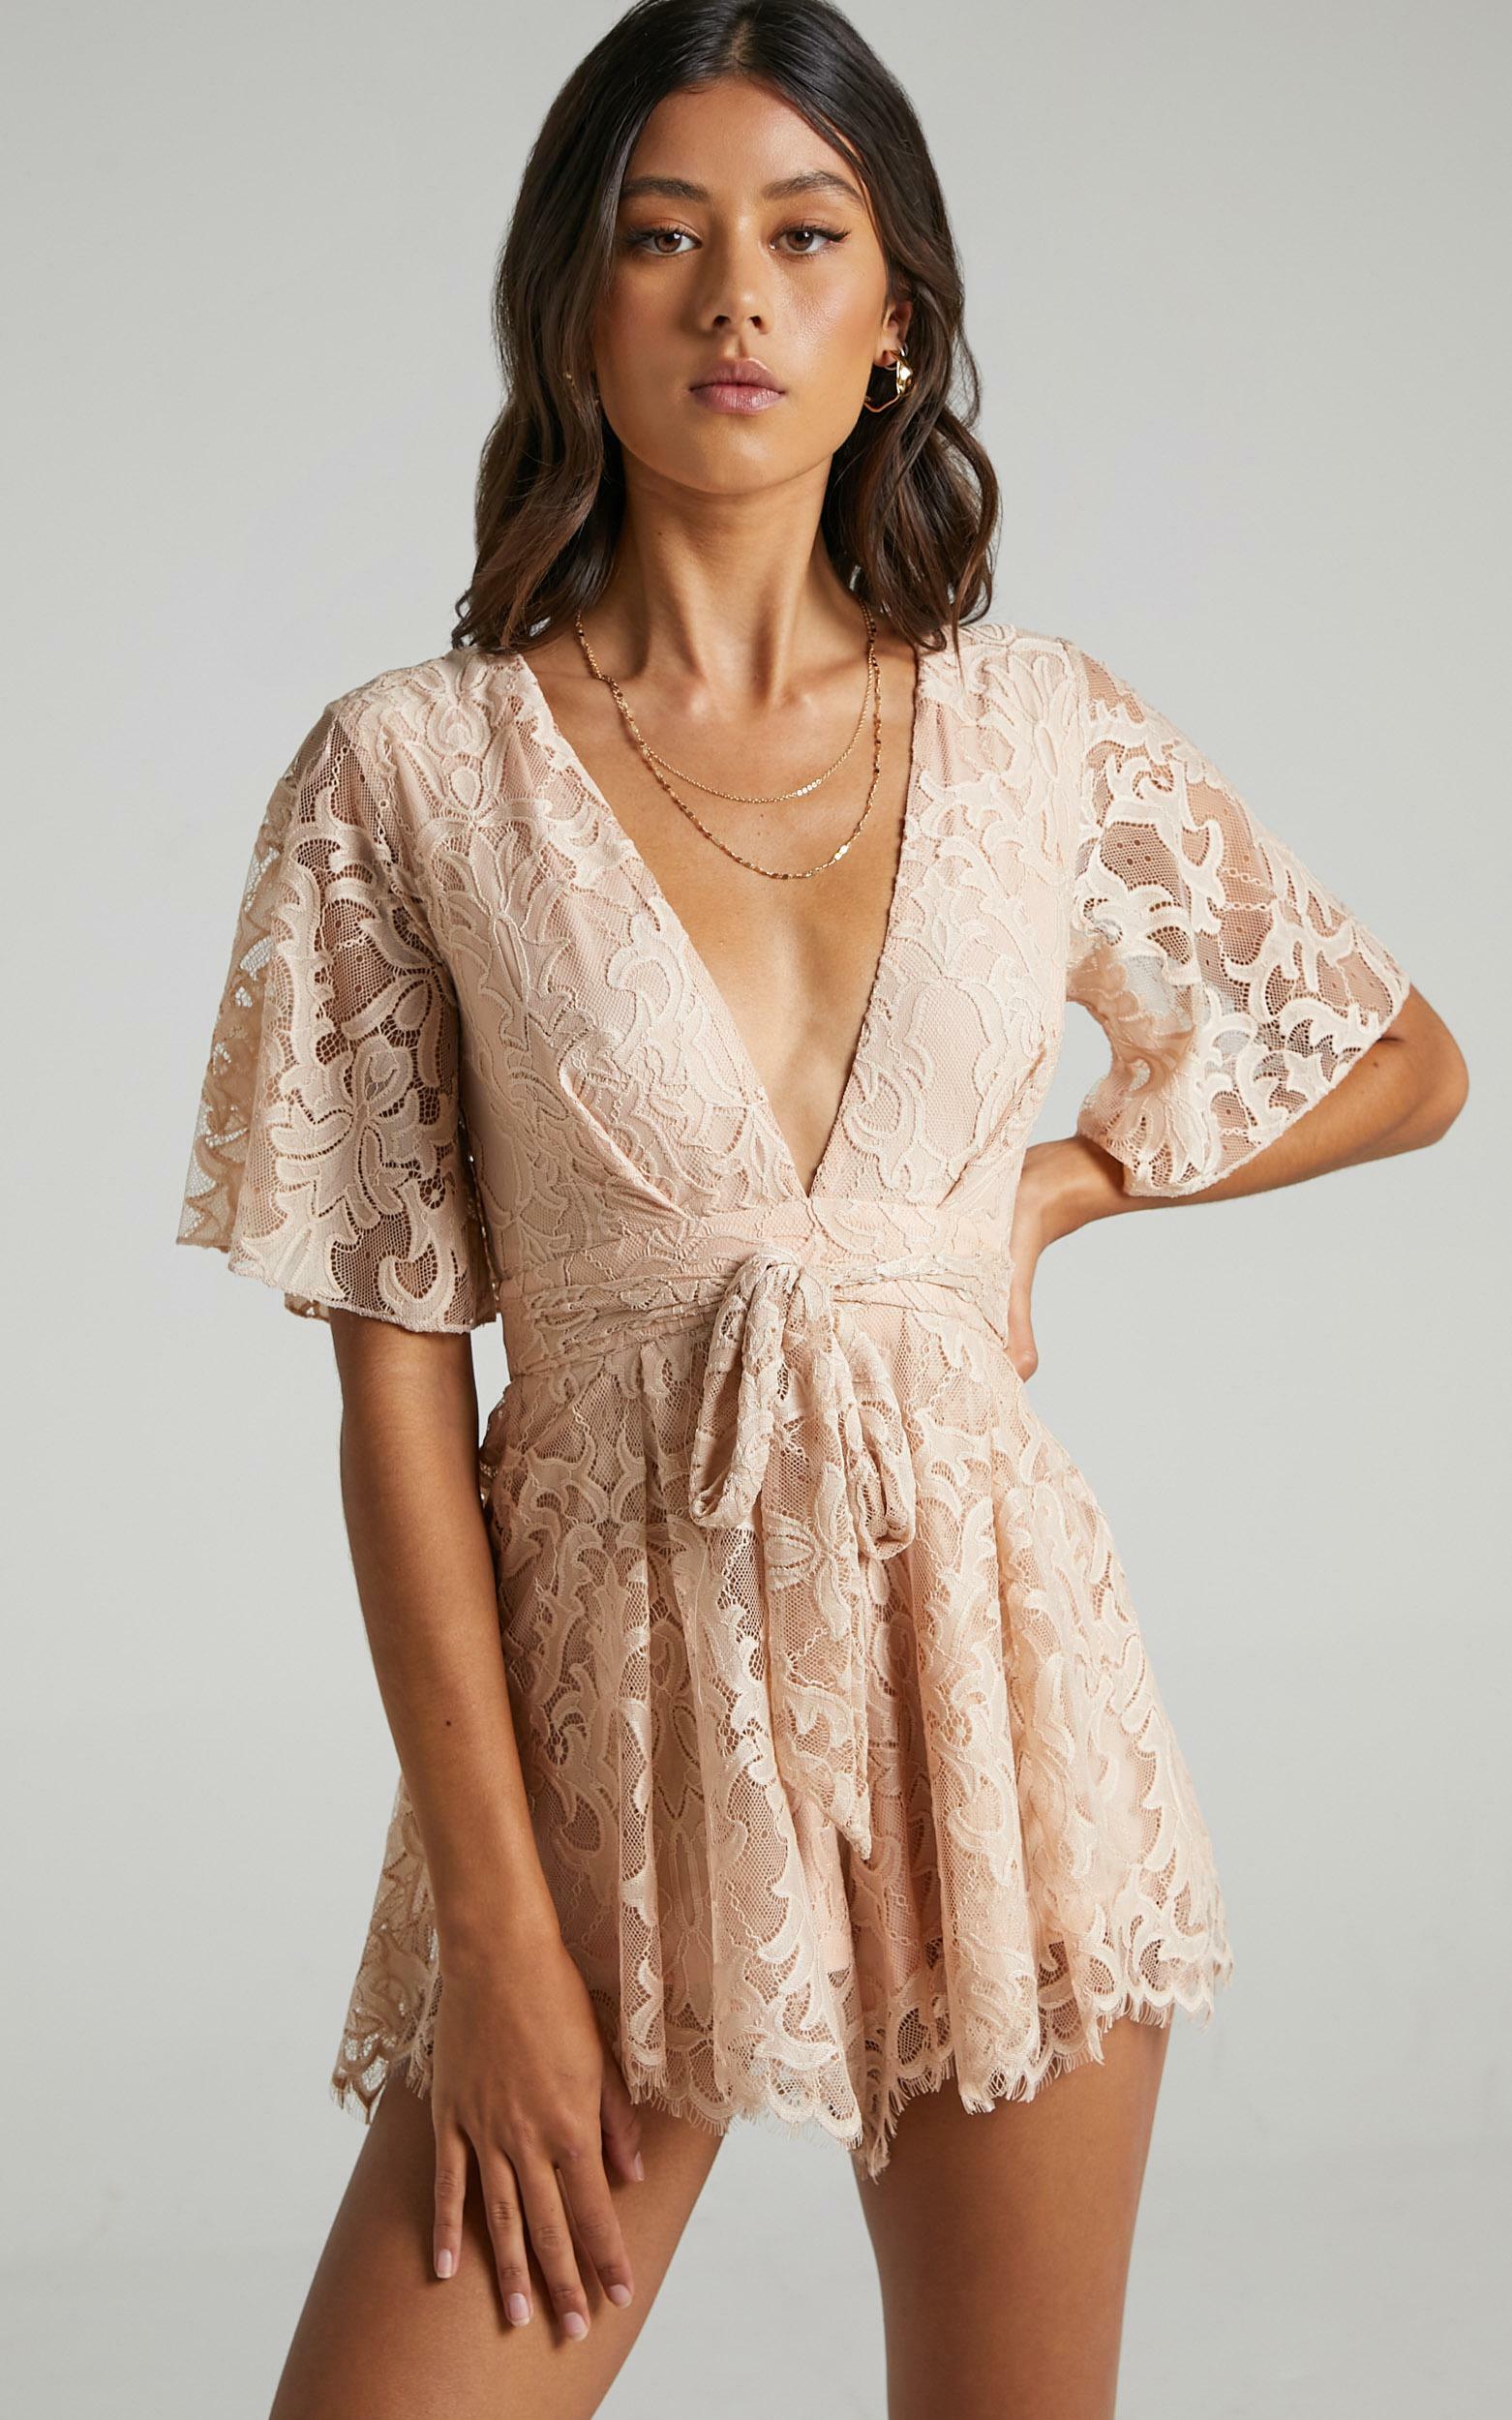 Break the Bar playsuit in Blush Lace - 18, PNK3, hi-res image number null